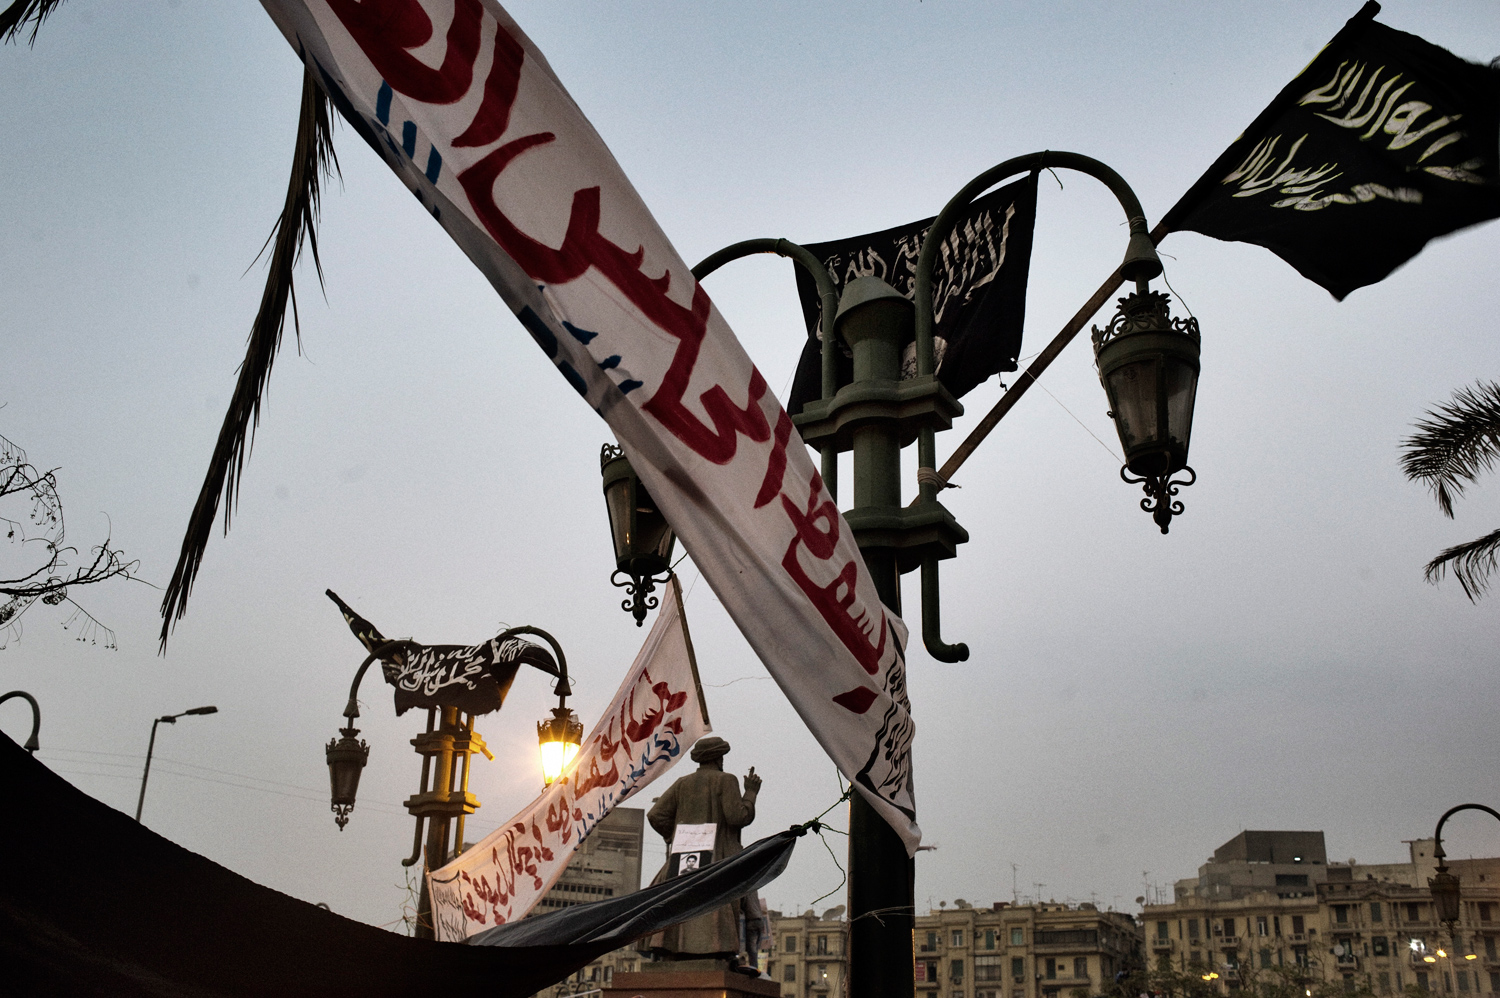 Cairo, Egypt — November 25, 2011
                              Banners and flags blanket Tahrir Square.